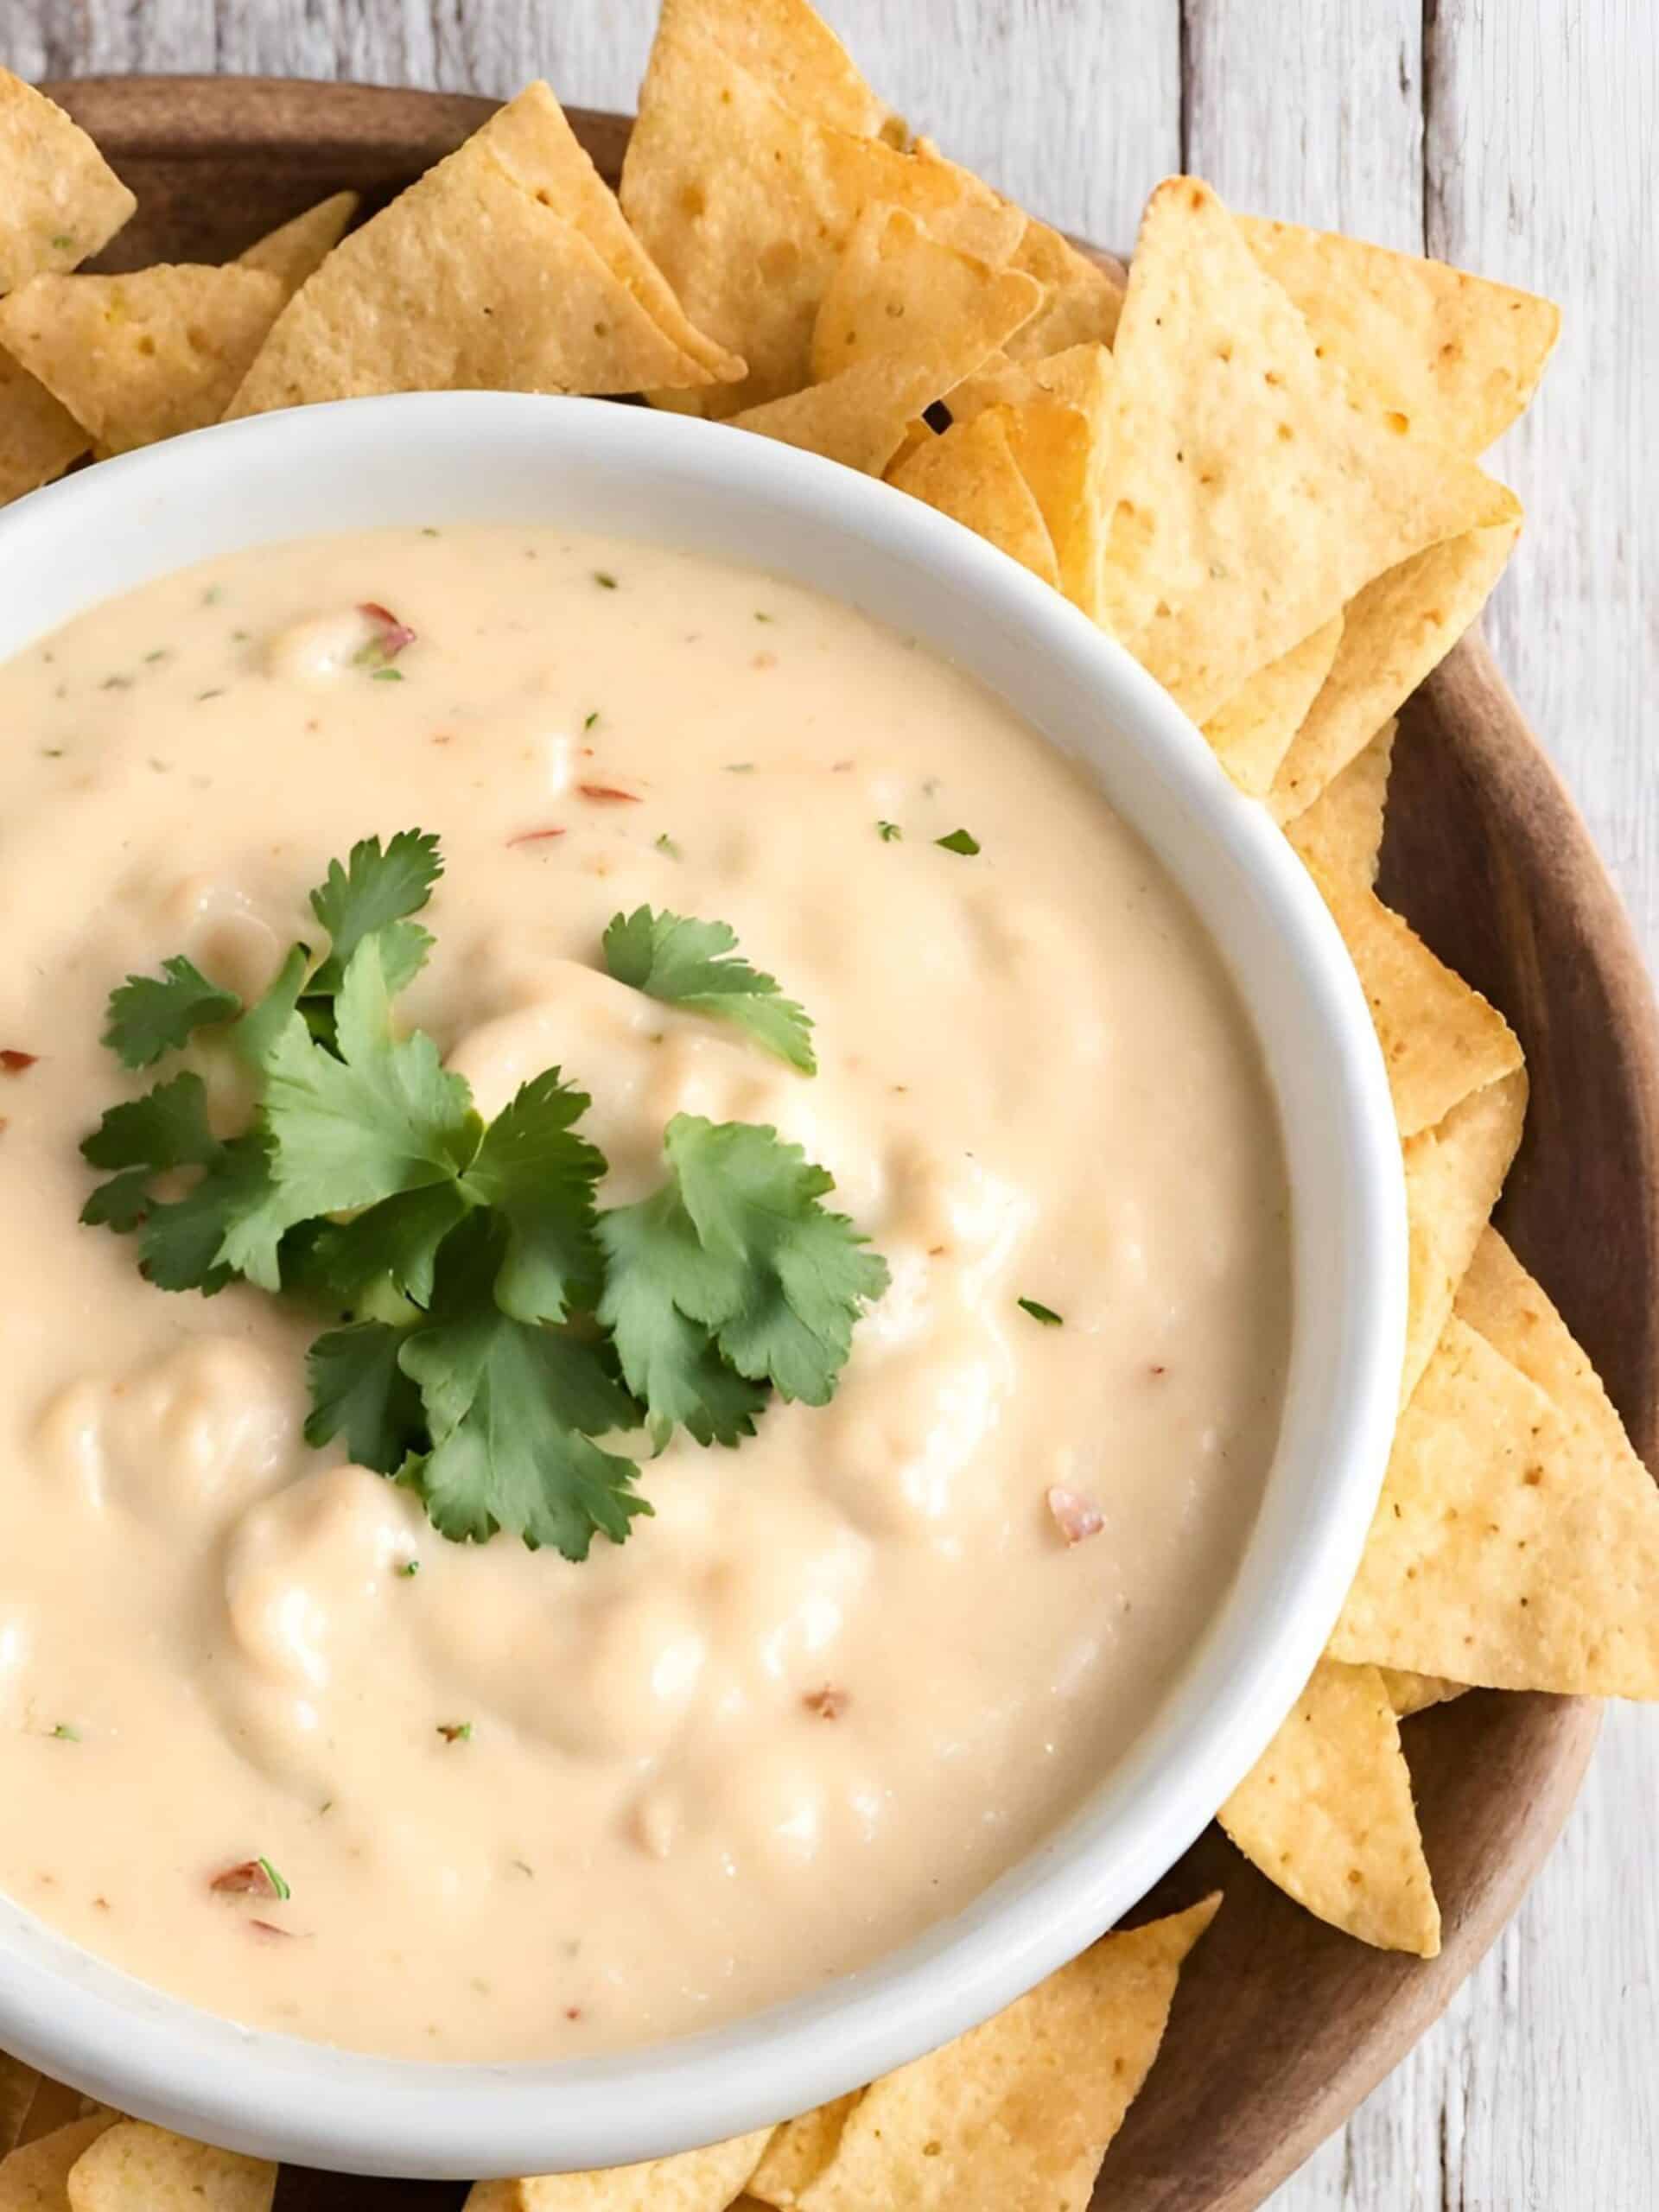 Do you love queso and chips? Enjoy them guilt-free with this Homemade Queso Dip made from scratch with fresh ingredients and no processed products!